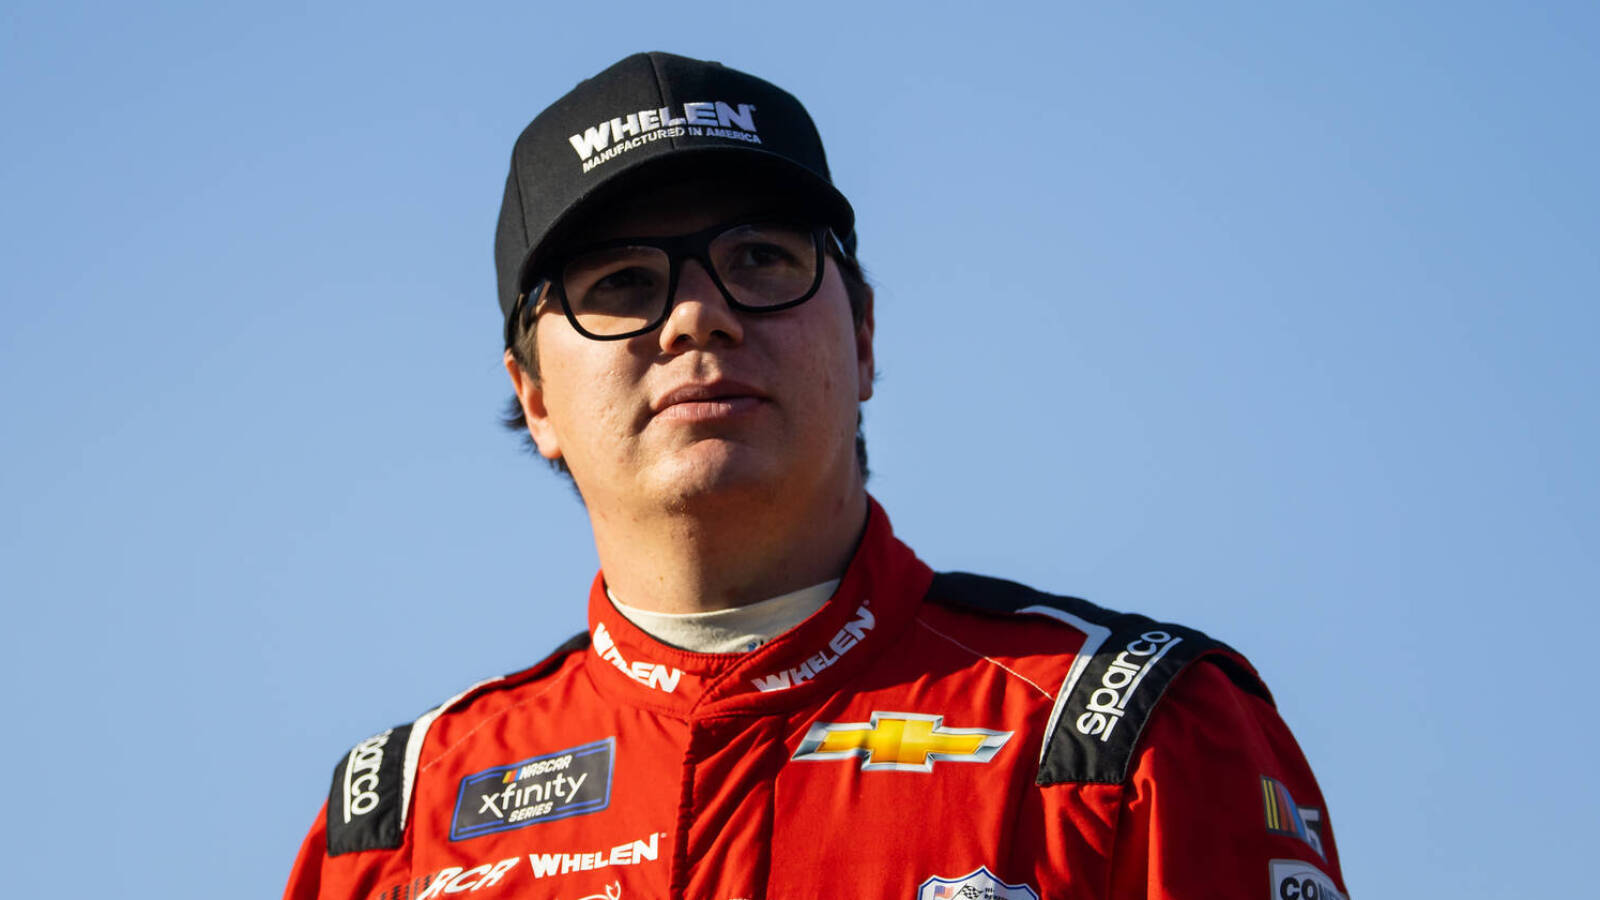 No time like the present: Sheldon Creed still searching for first NASCAR Xfinity Series victory